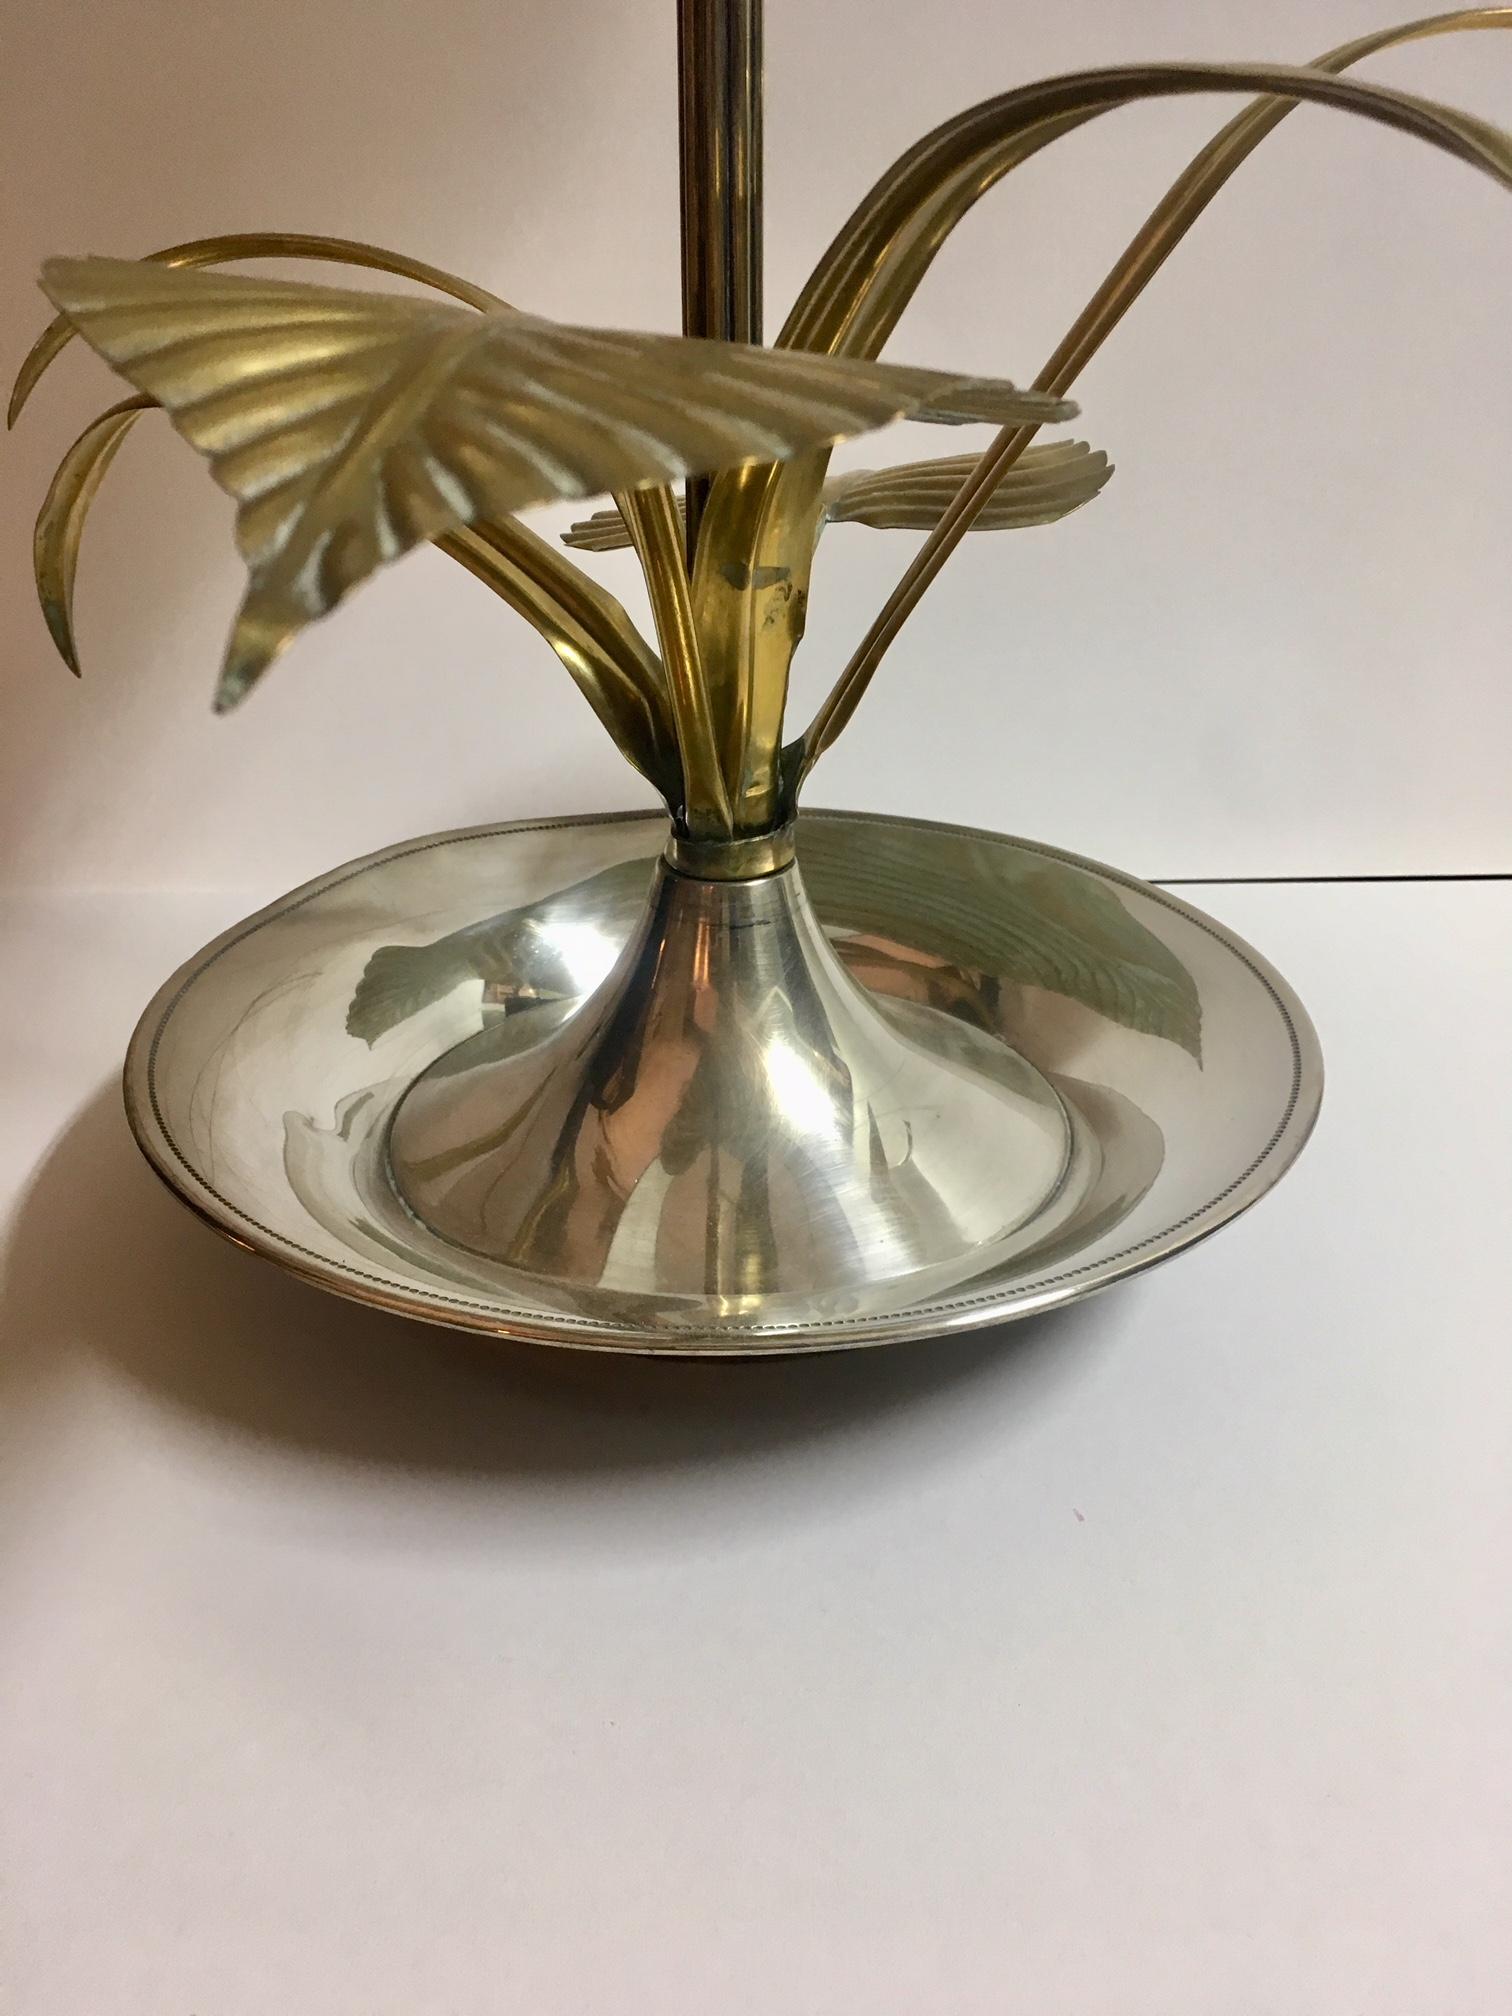 Flower table lamp made in high quality brass depicting a lotus flower and foliage, renovated and new electrical wiring, with two points of light, lampshade screen in silk and velvet.